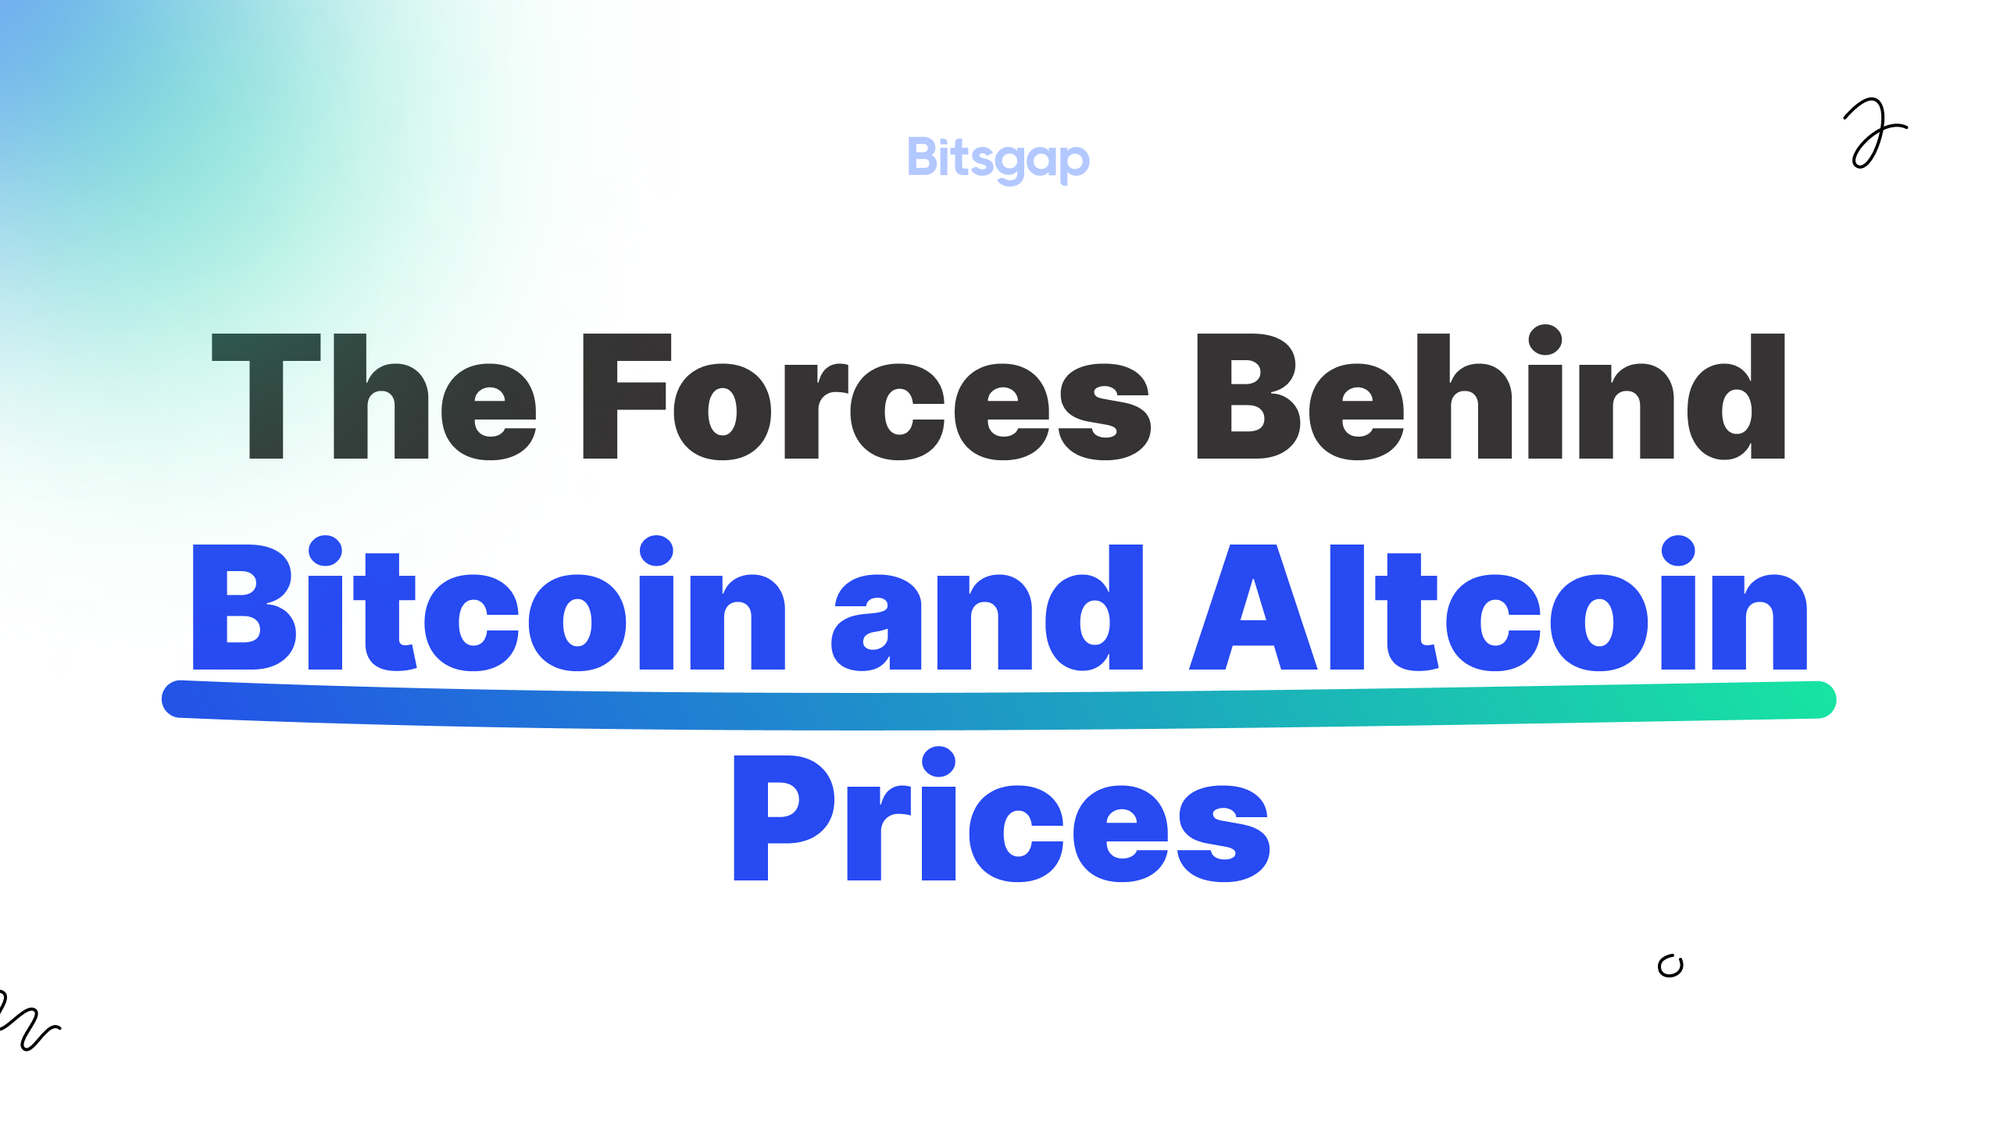 What Factors Influence the Price of Bitcoin and Altcoins?